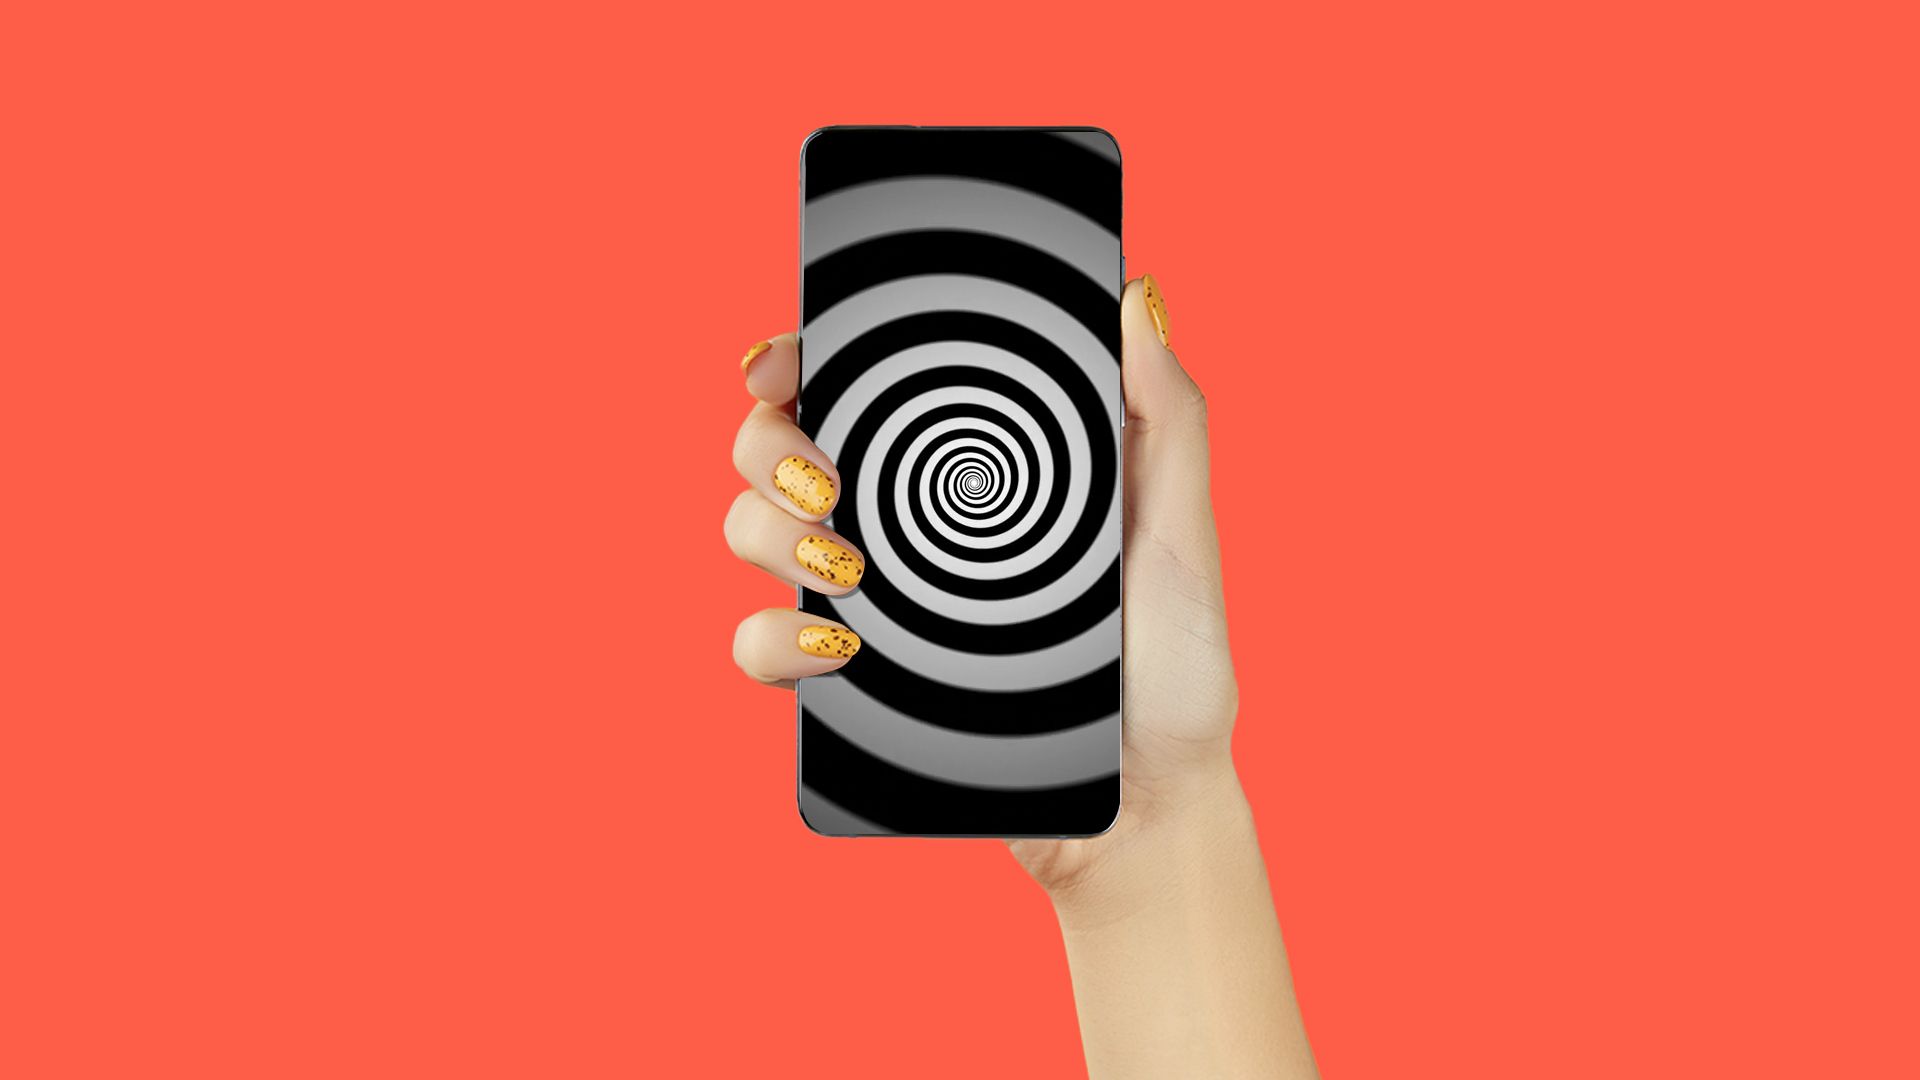 Illustration of a manicured hand holding a phone with a spinning black and white vortex on the screen